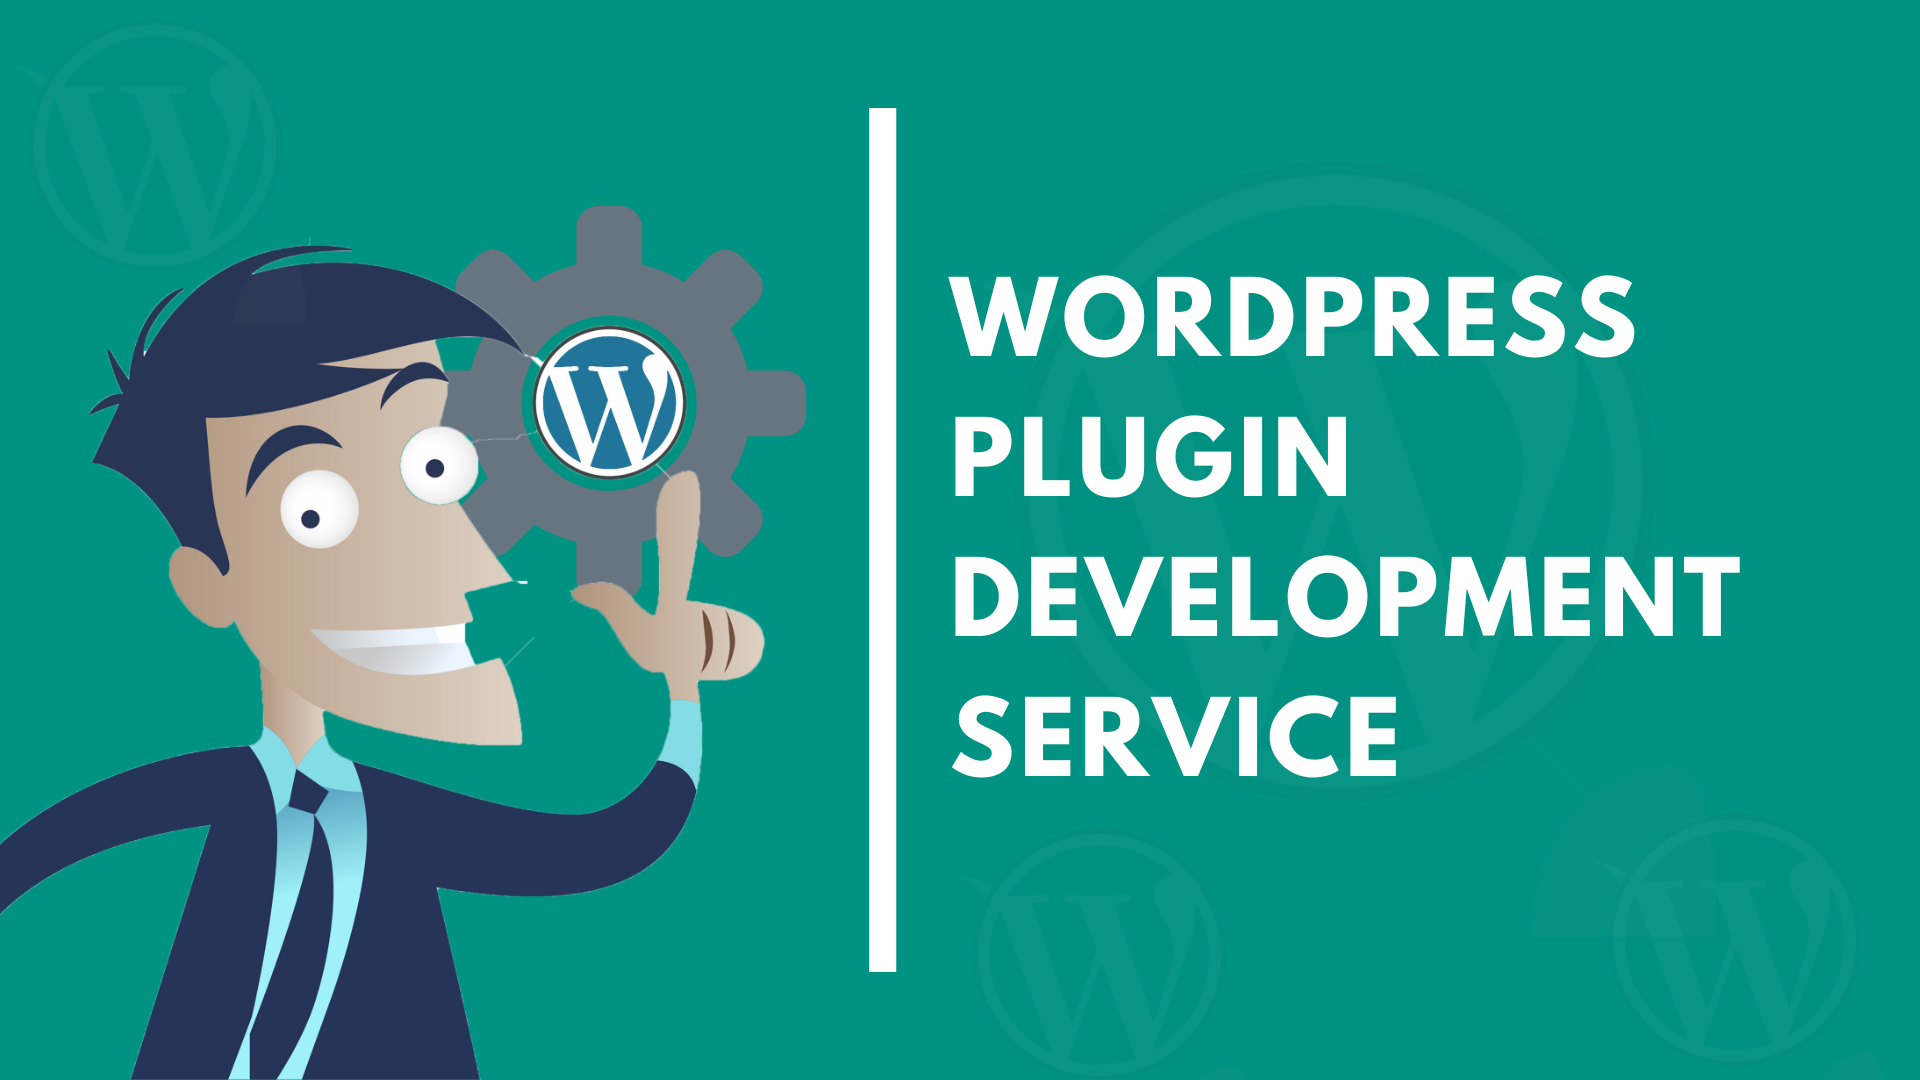 Are you looking for WordPress Plugin Development Service?